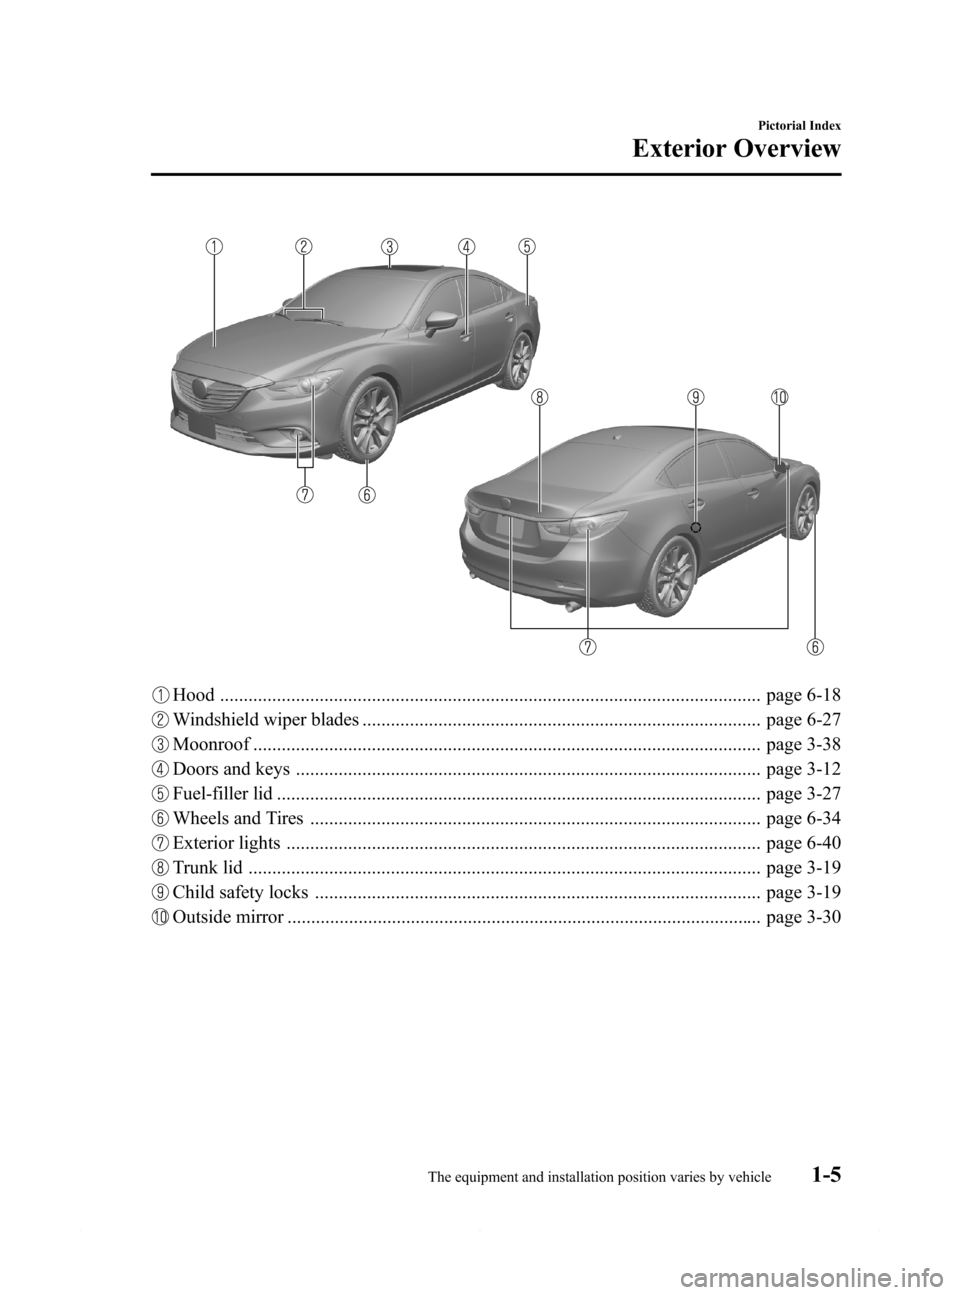 MAZDA MODEL 6 2014  Owners Manual (in English) Black plate (11,1)
Hood .................................................................................................................. page 6-18
Windshield wiper blades ...........................